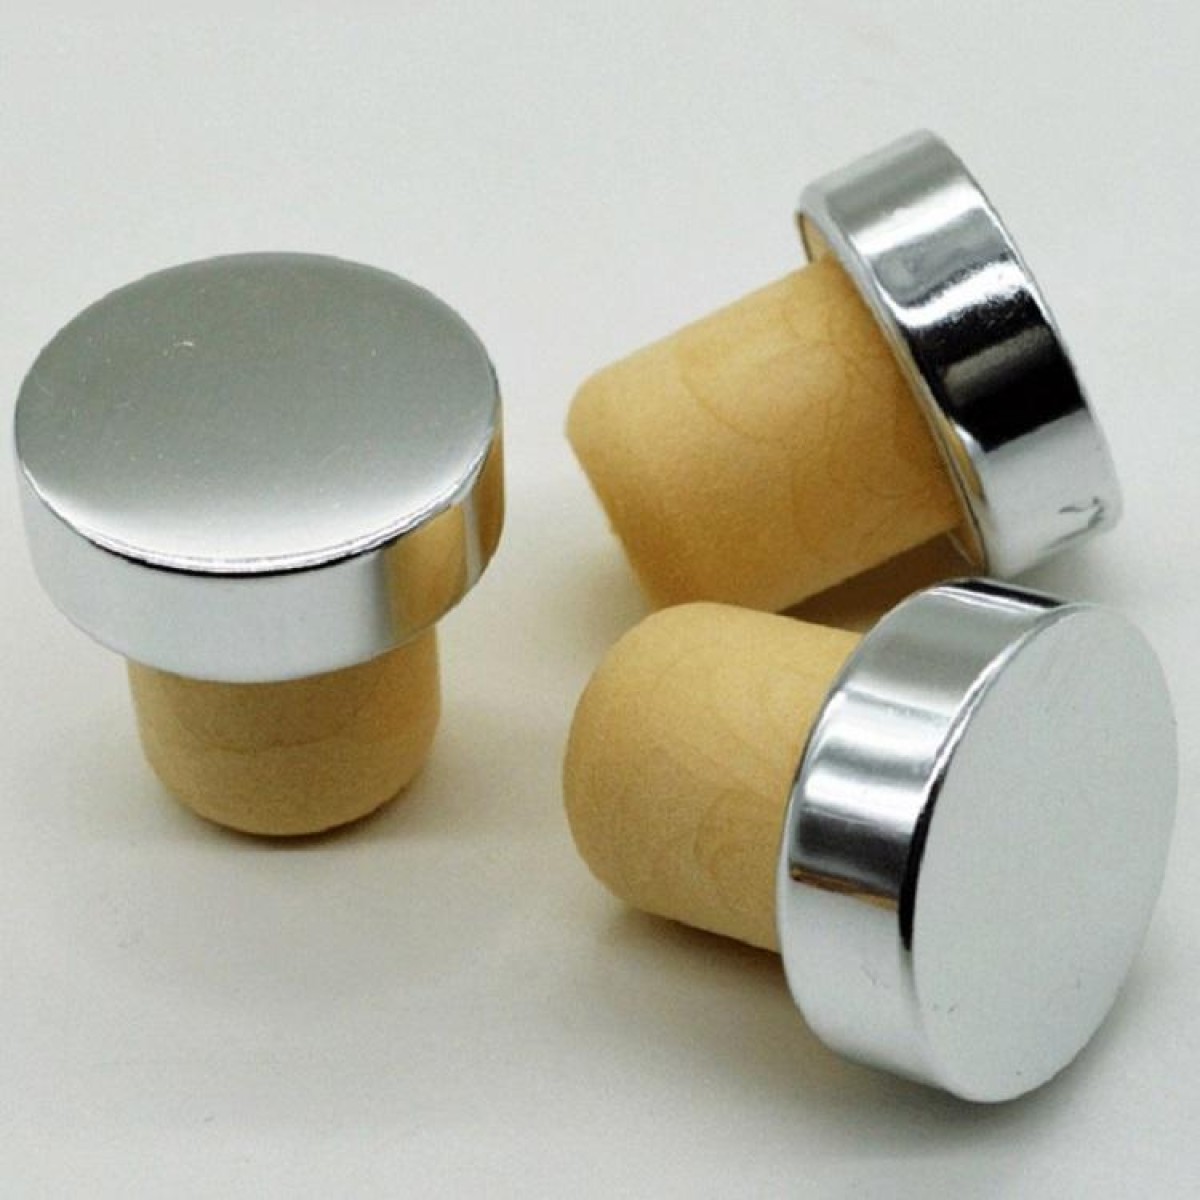 2 PCS Polymer Wine Stopper Cork Oak Stoppers with Metal Iron Cover, Color:Silver